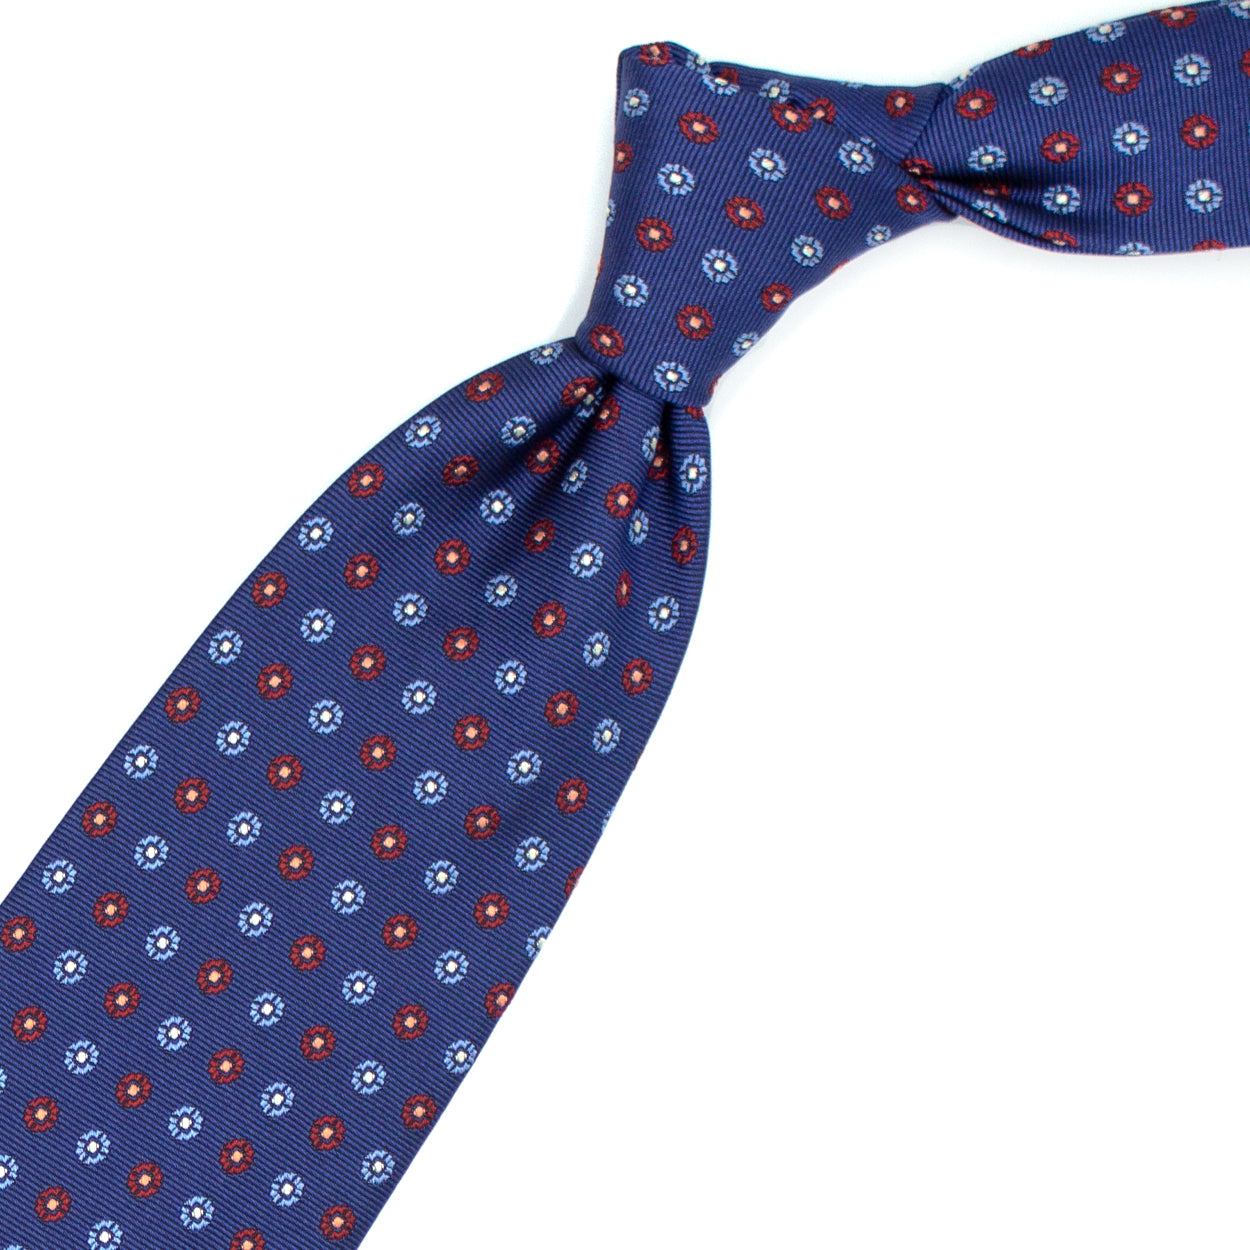 Blue tie with blue and red flowers and white squares